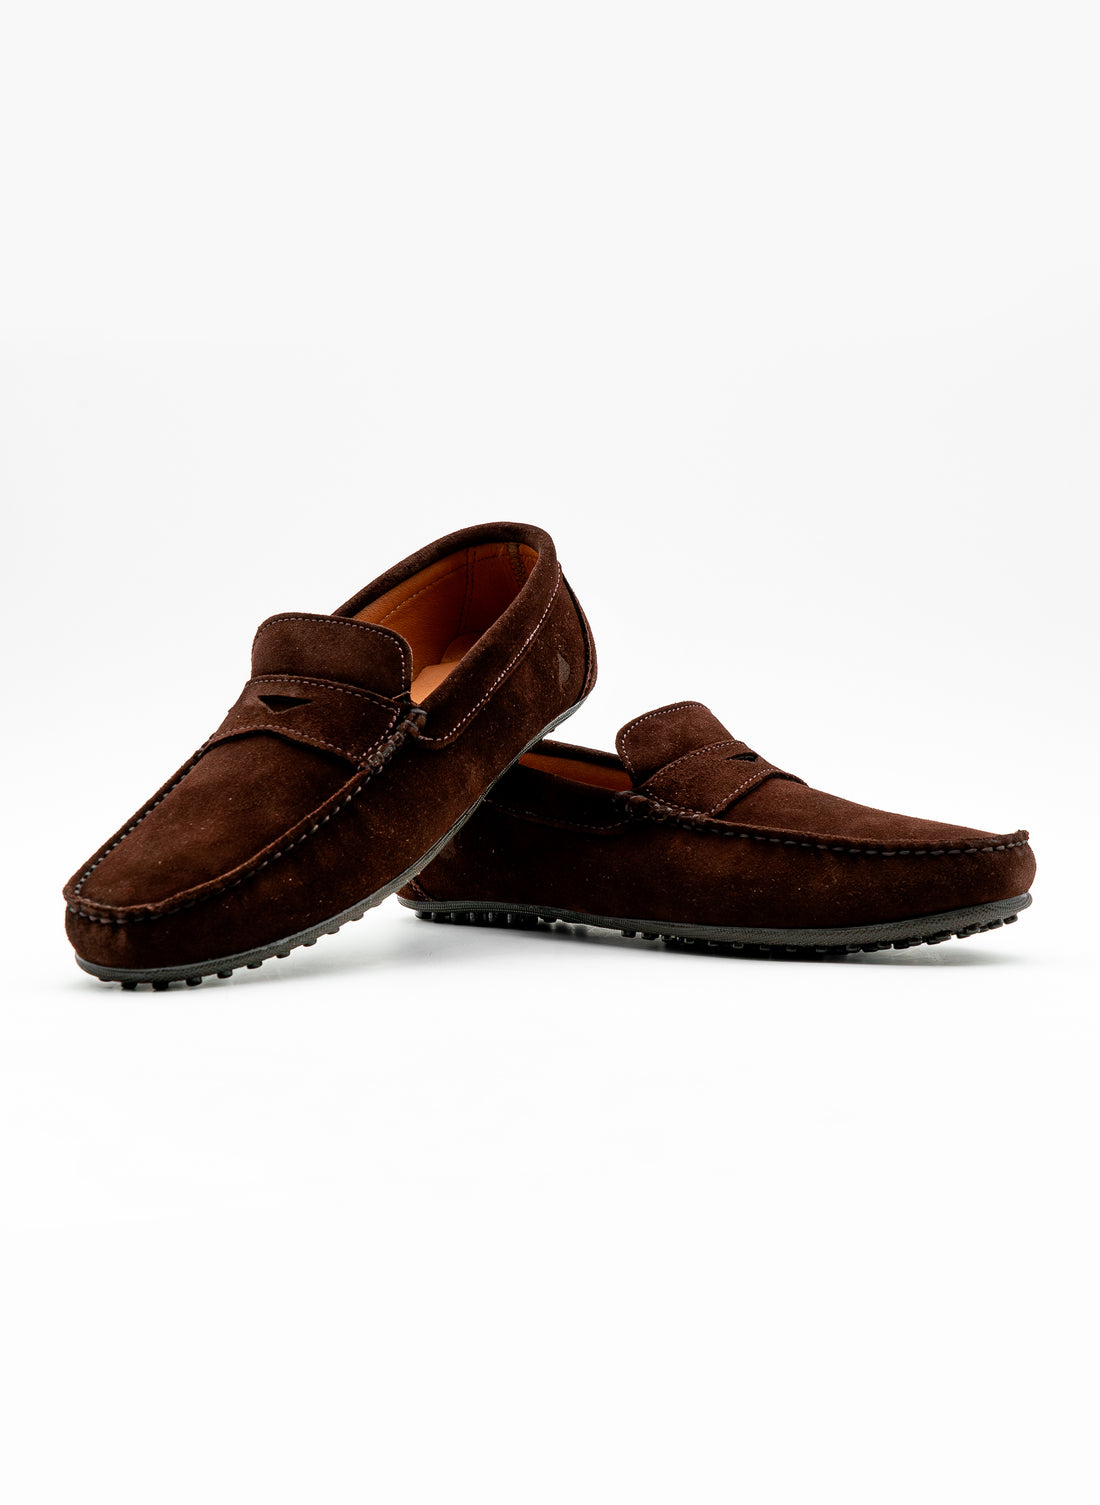 Men's Chocolate Brown Moccasin